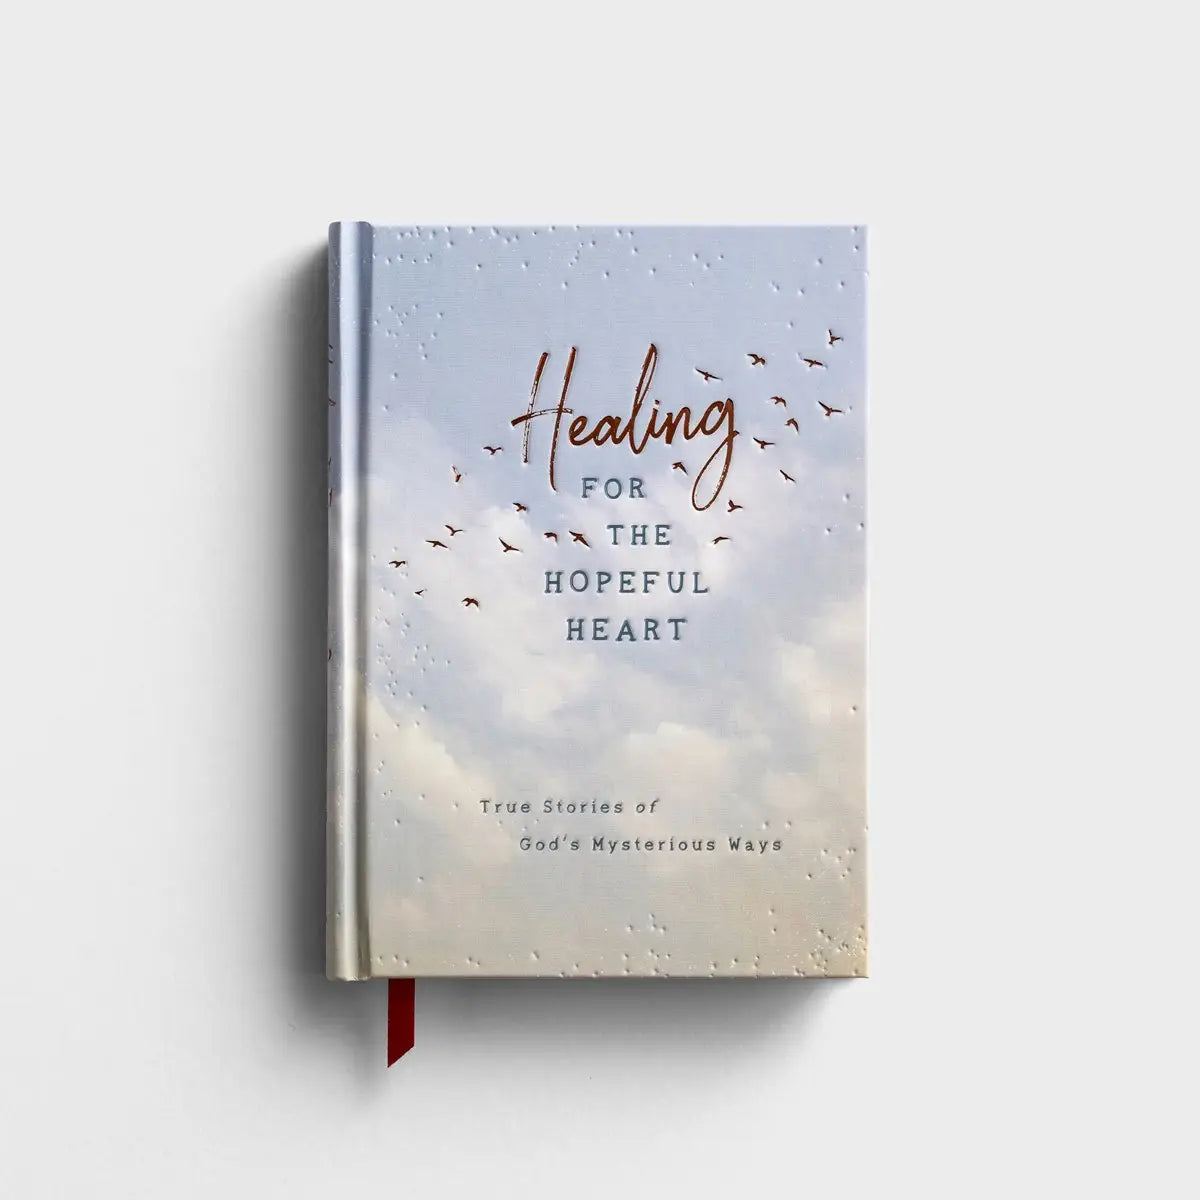 Daysprings Healing for the Hopeful Heart: True Stories of God's Mysterious Ways